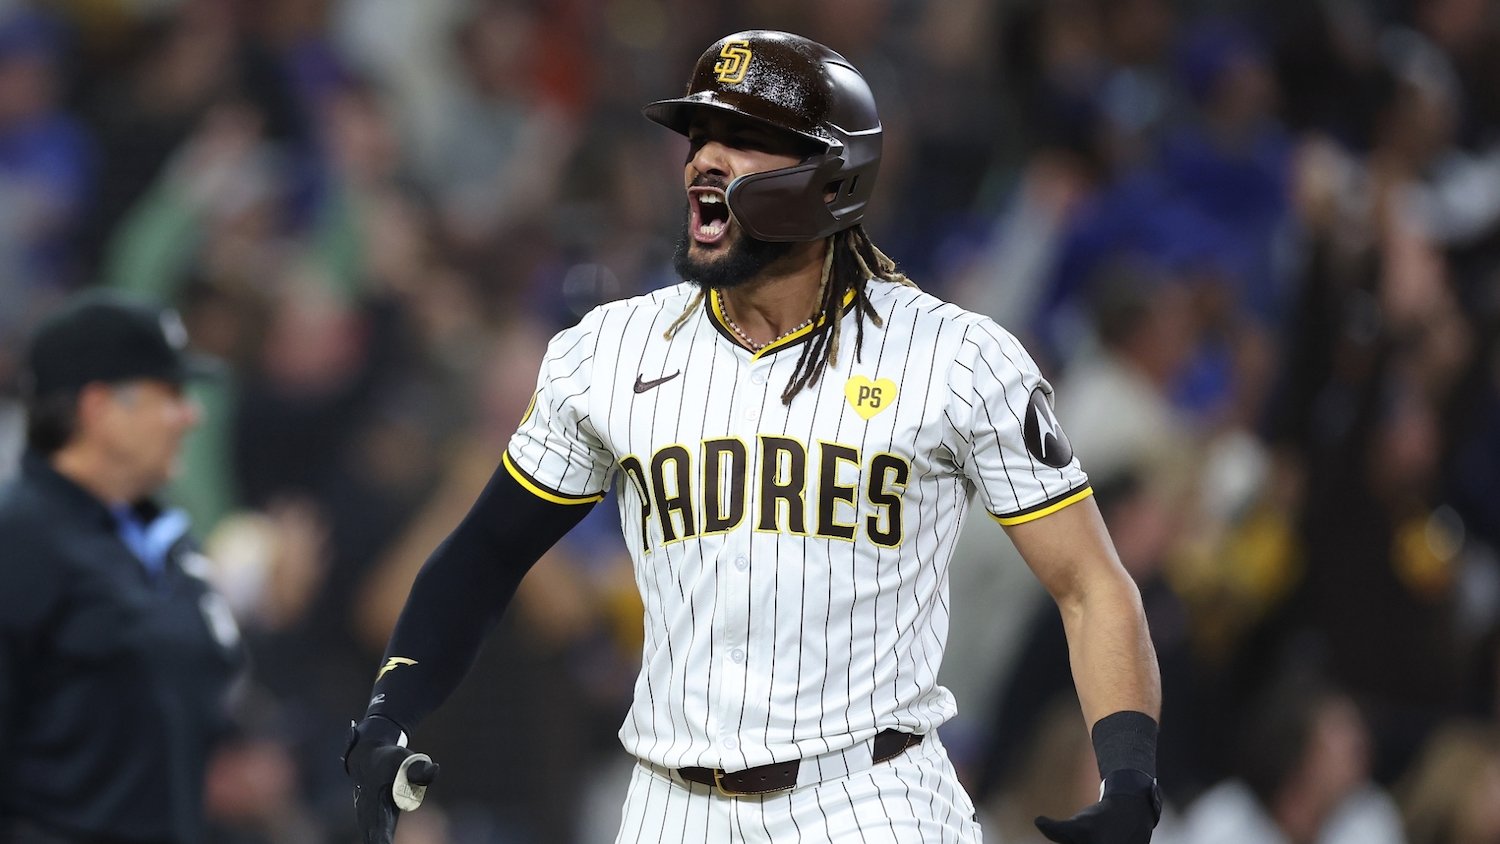 Padres player Fernando Tatís Jr. will face the Los Angeles Dodgers this May